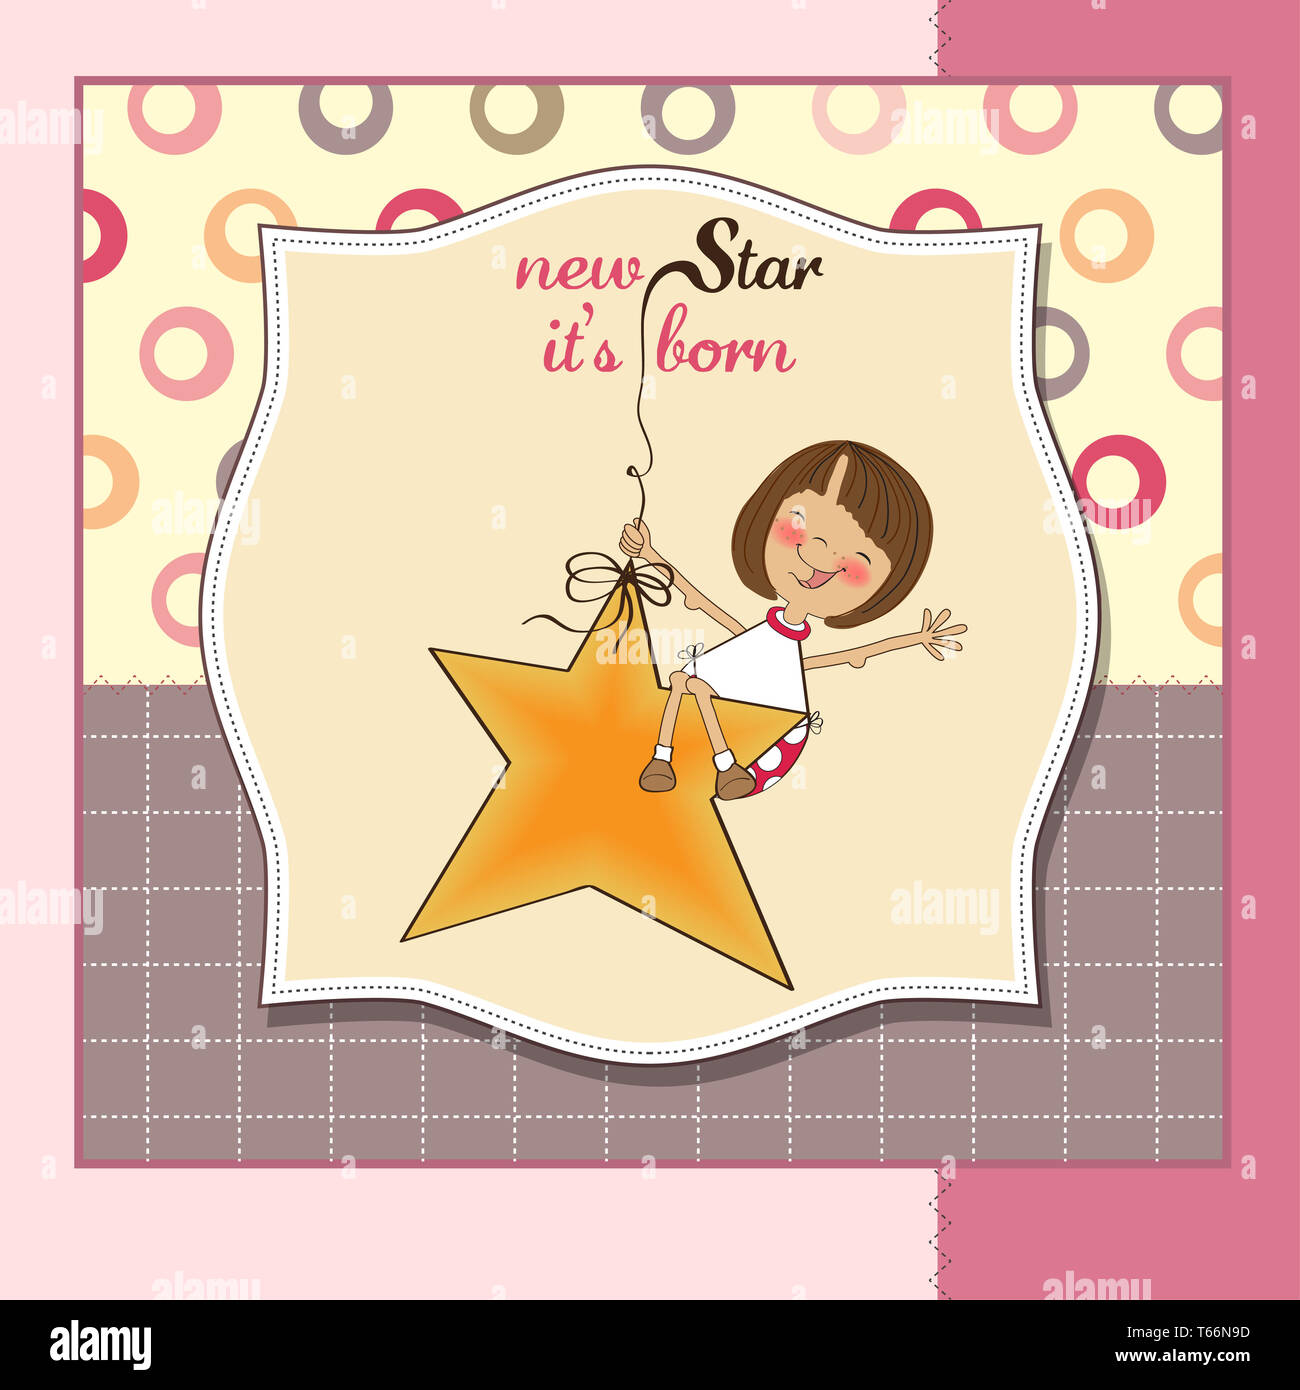 new star it's born.welcome baby card Stock Photo